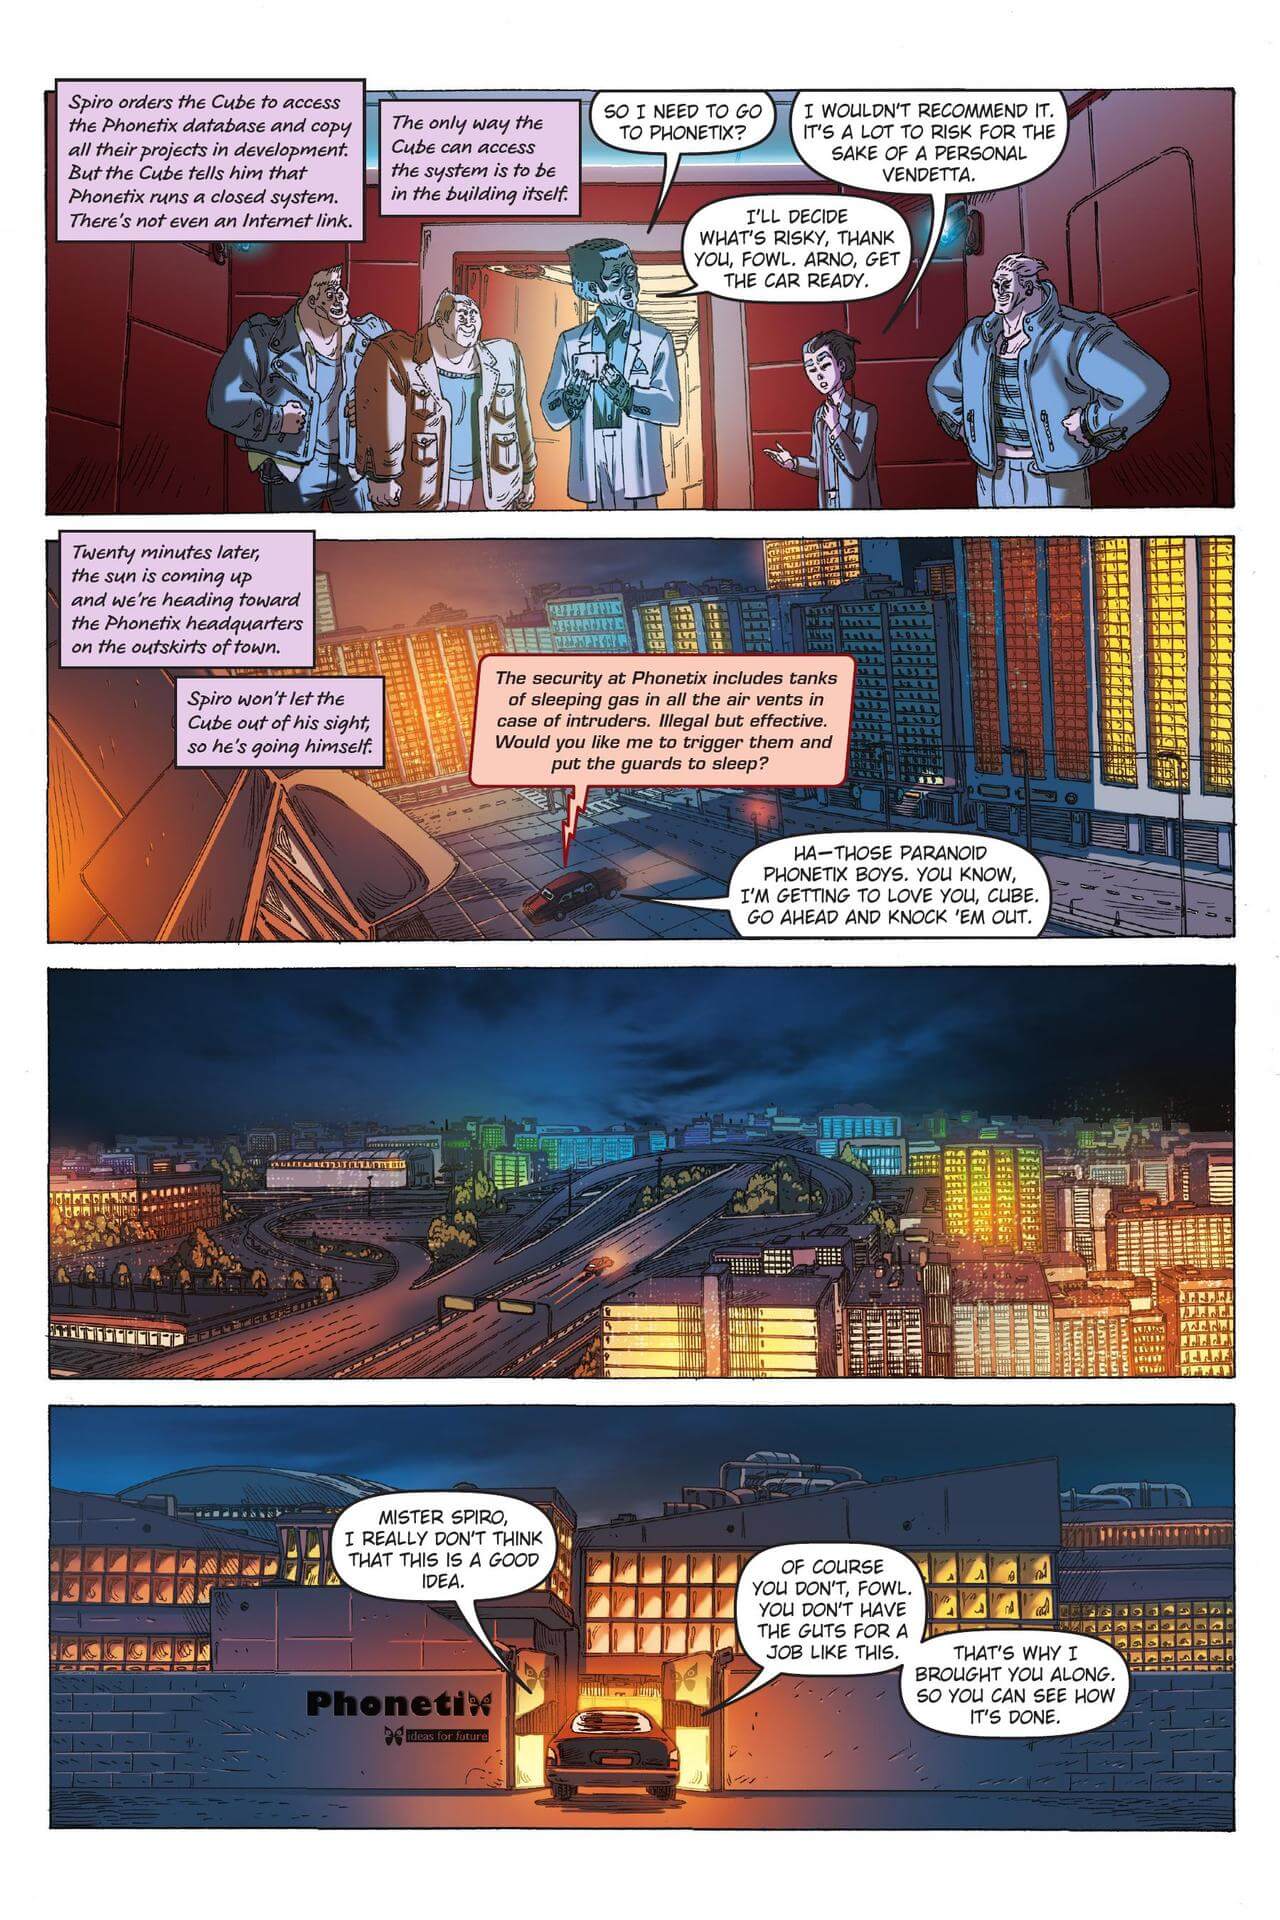 page 92 of artemis fowl eternity code graphic novel